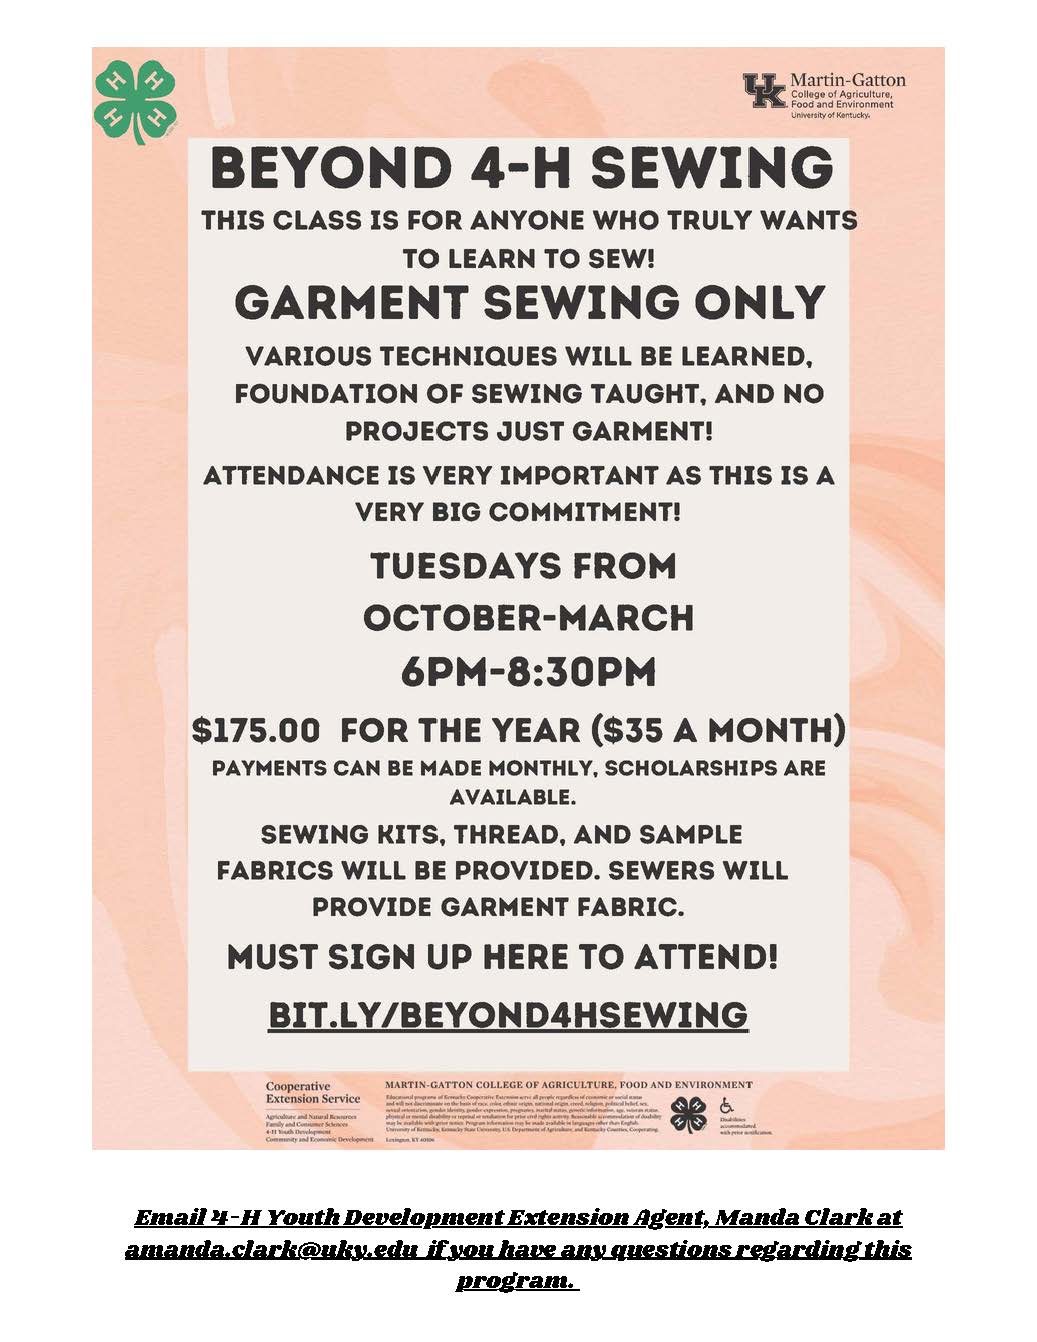 Beyond 4-H Sewing flyer